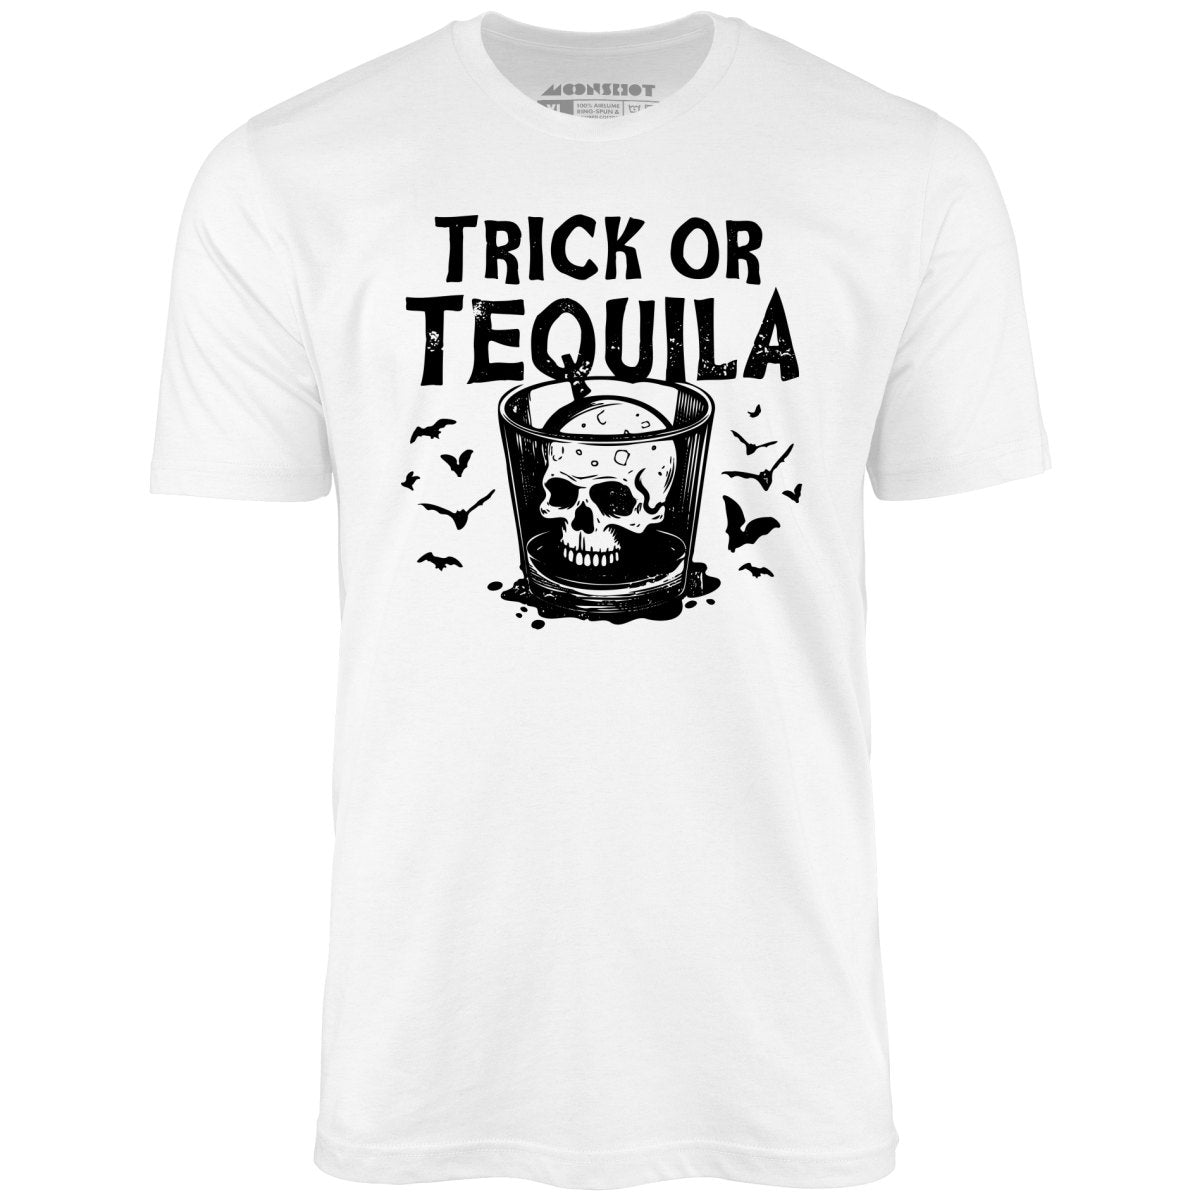 Trick or Tequila - Unisex T-Shirt